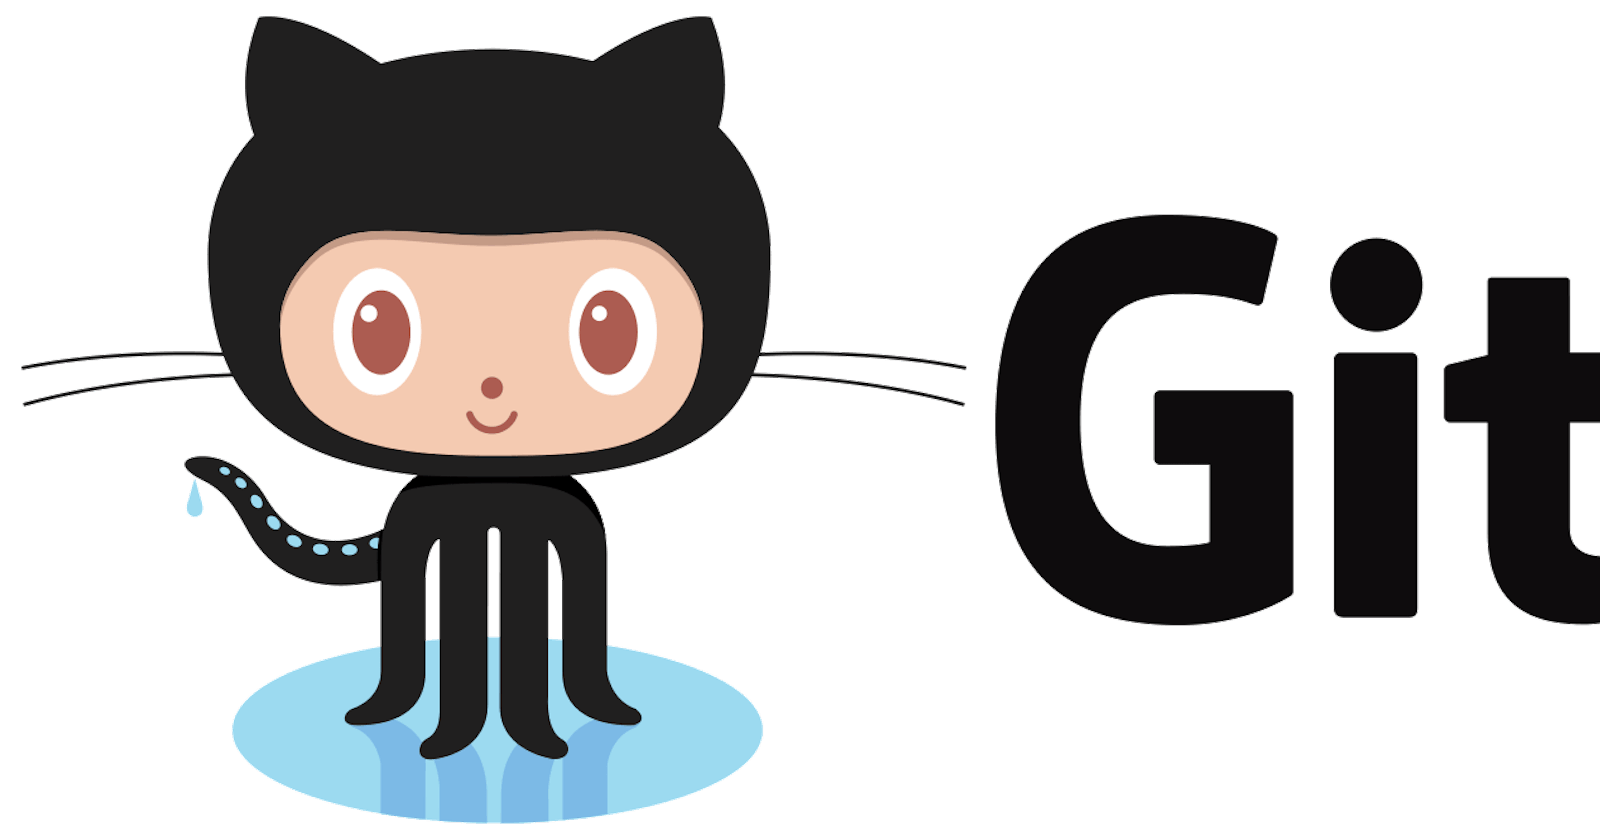 How to sign your commits on GitHub